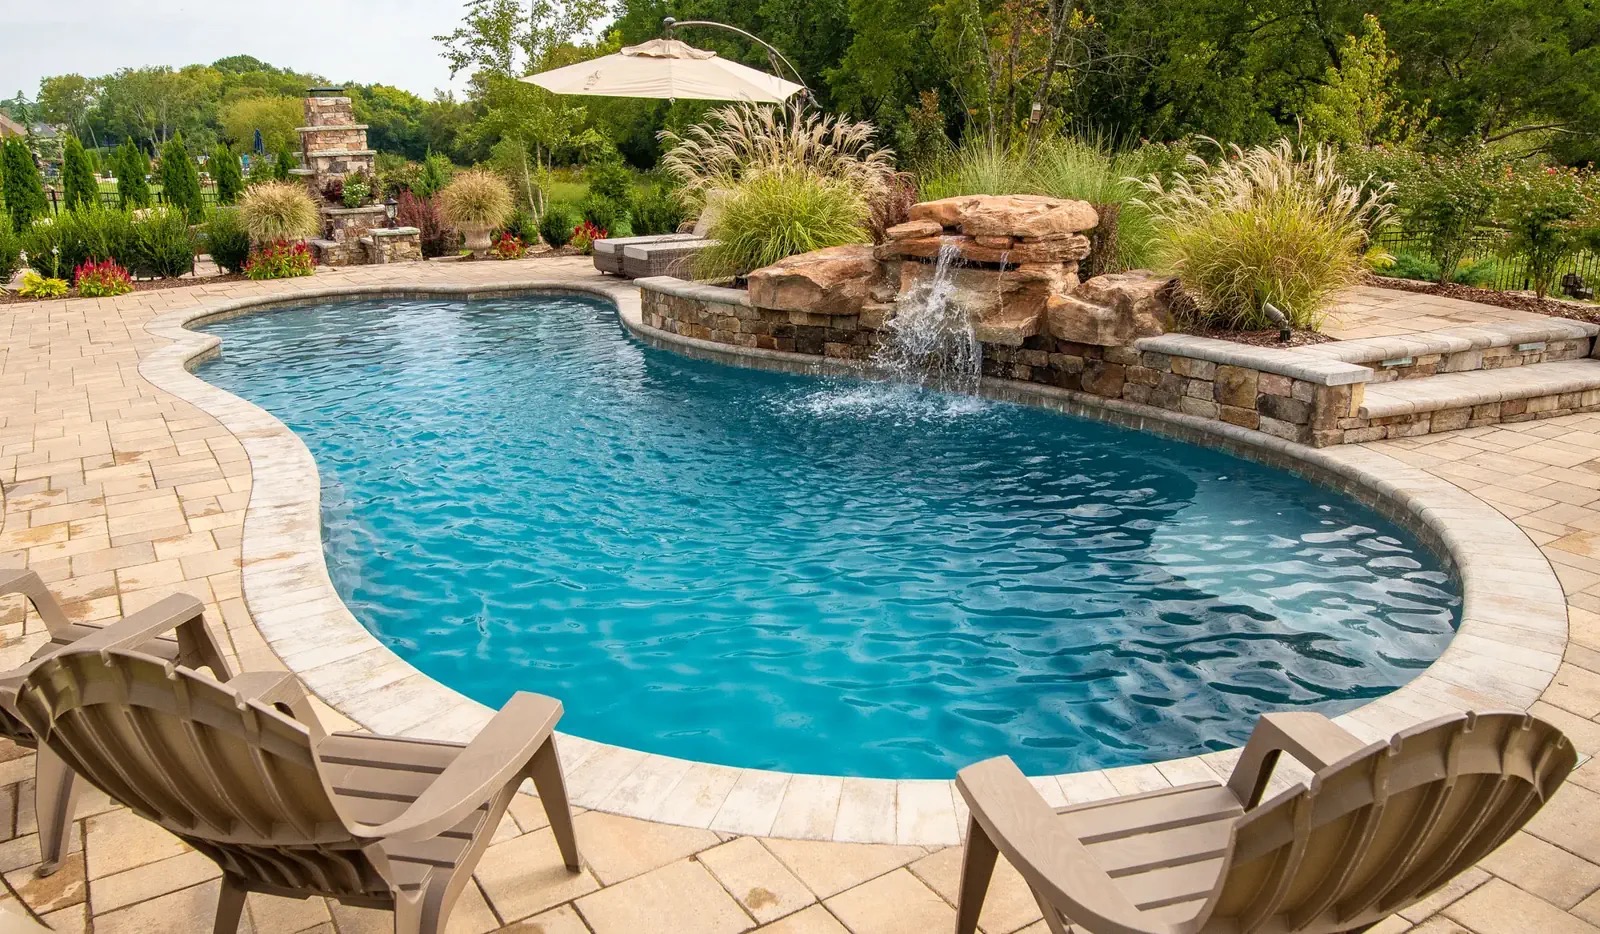 Top Design Trends in 2023 for Fiberglass Pools and Spas